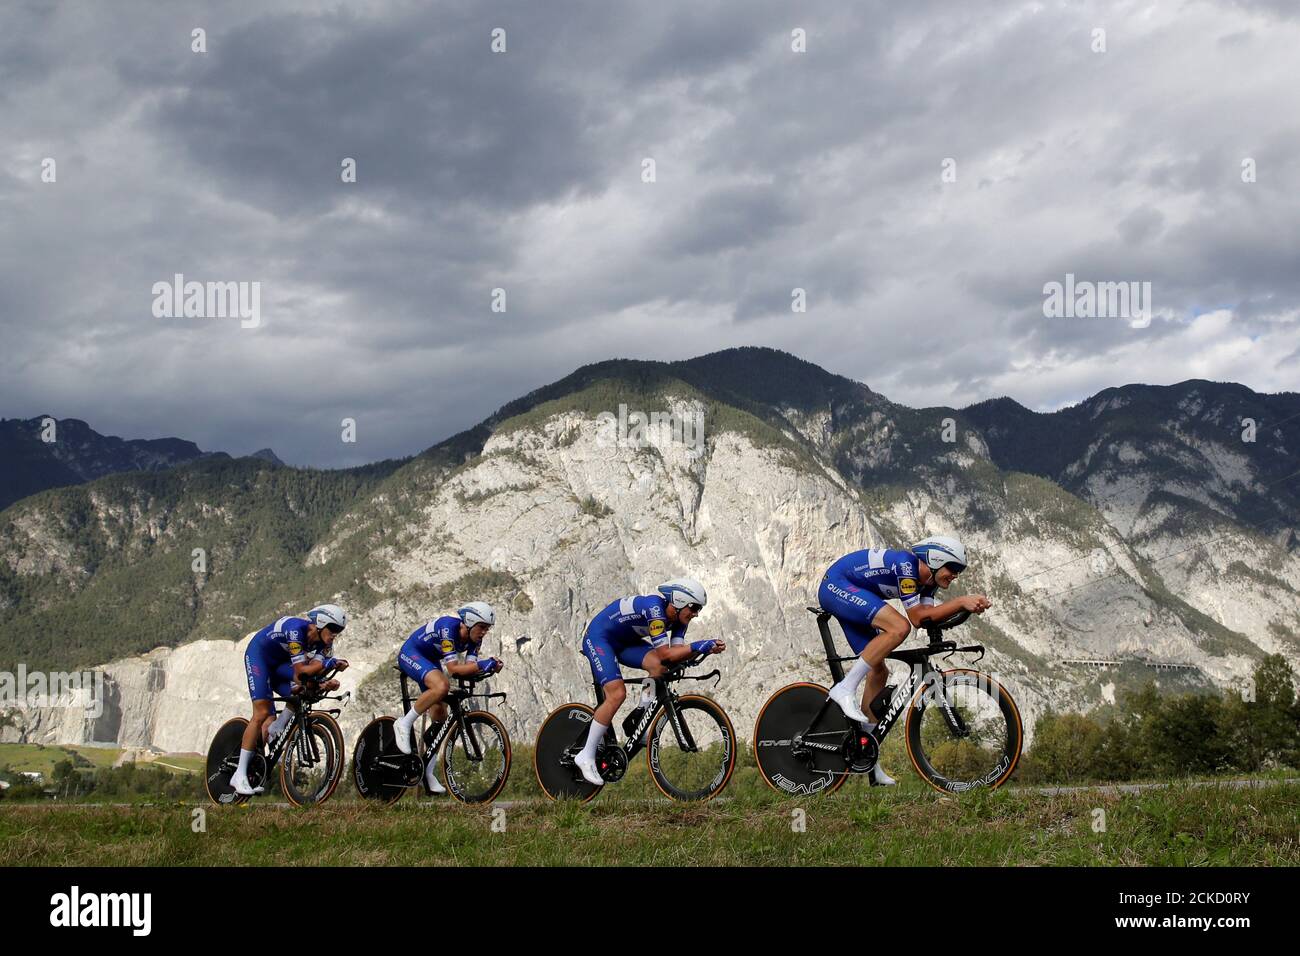 Cycling - UCI Road Cycling World Championships - Tirol, Austria - September  23, 2018 Team Quick-Step Floors during the Men's Team Time Trial  REUTERS/Heinz-Peter Bader Stock Photo - Alamy